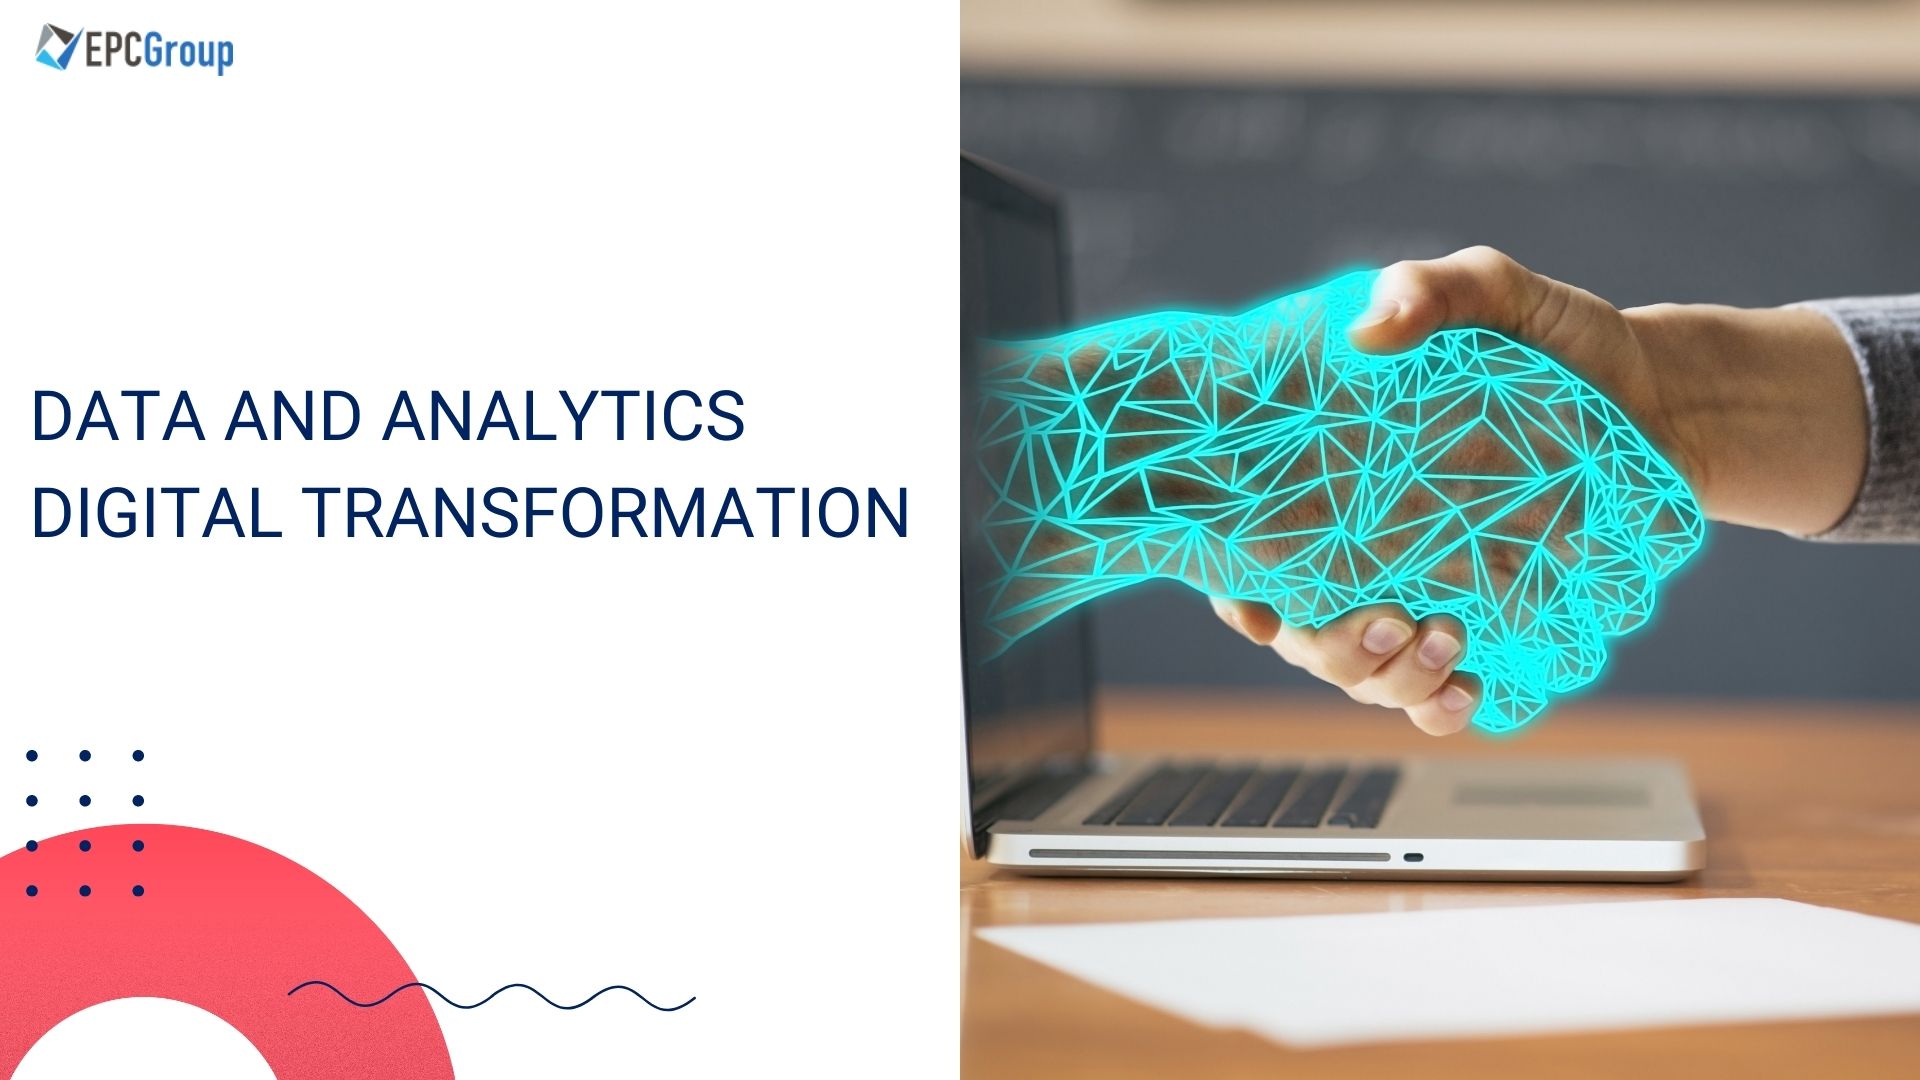 Why Are Data And Analytics Key to Digital Transformation?